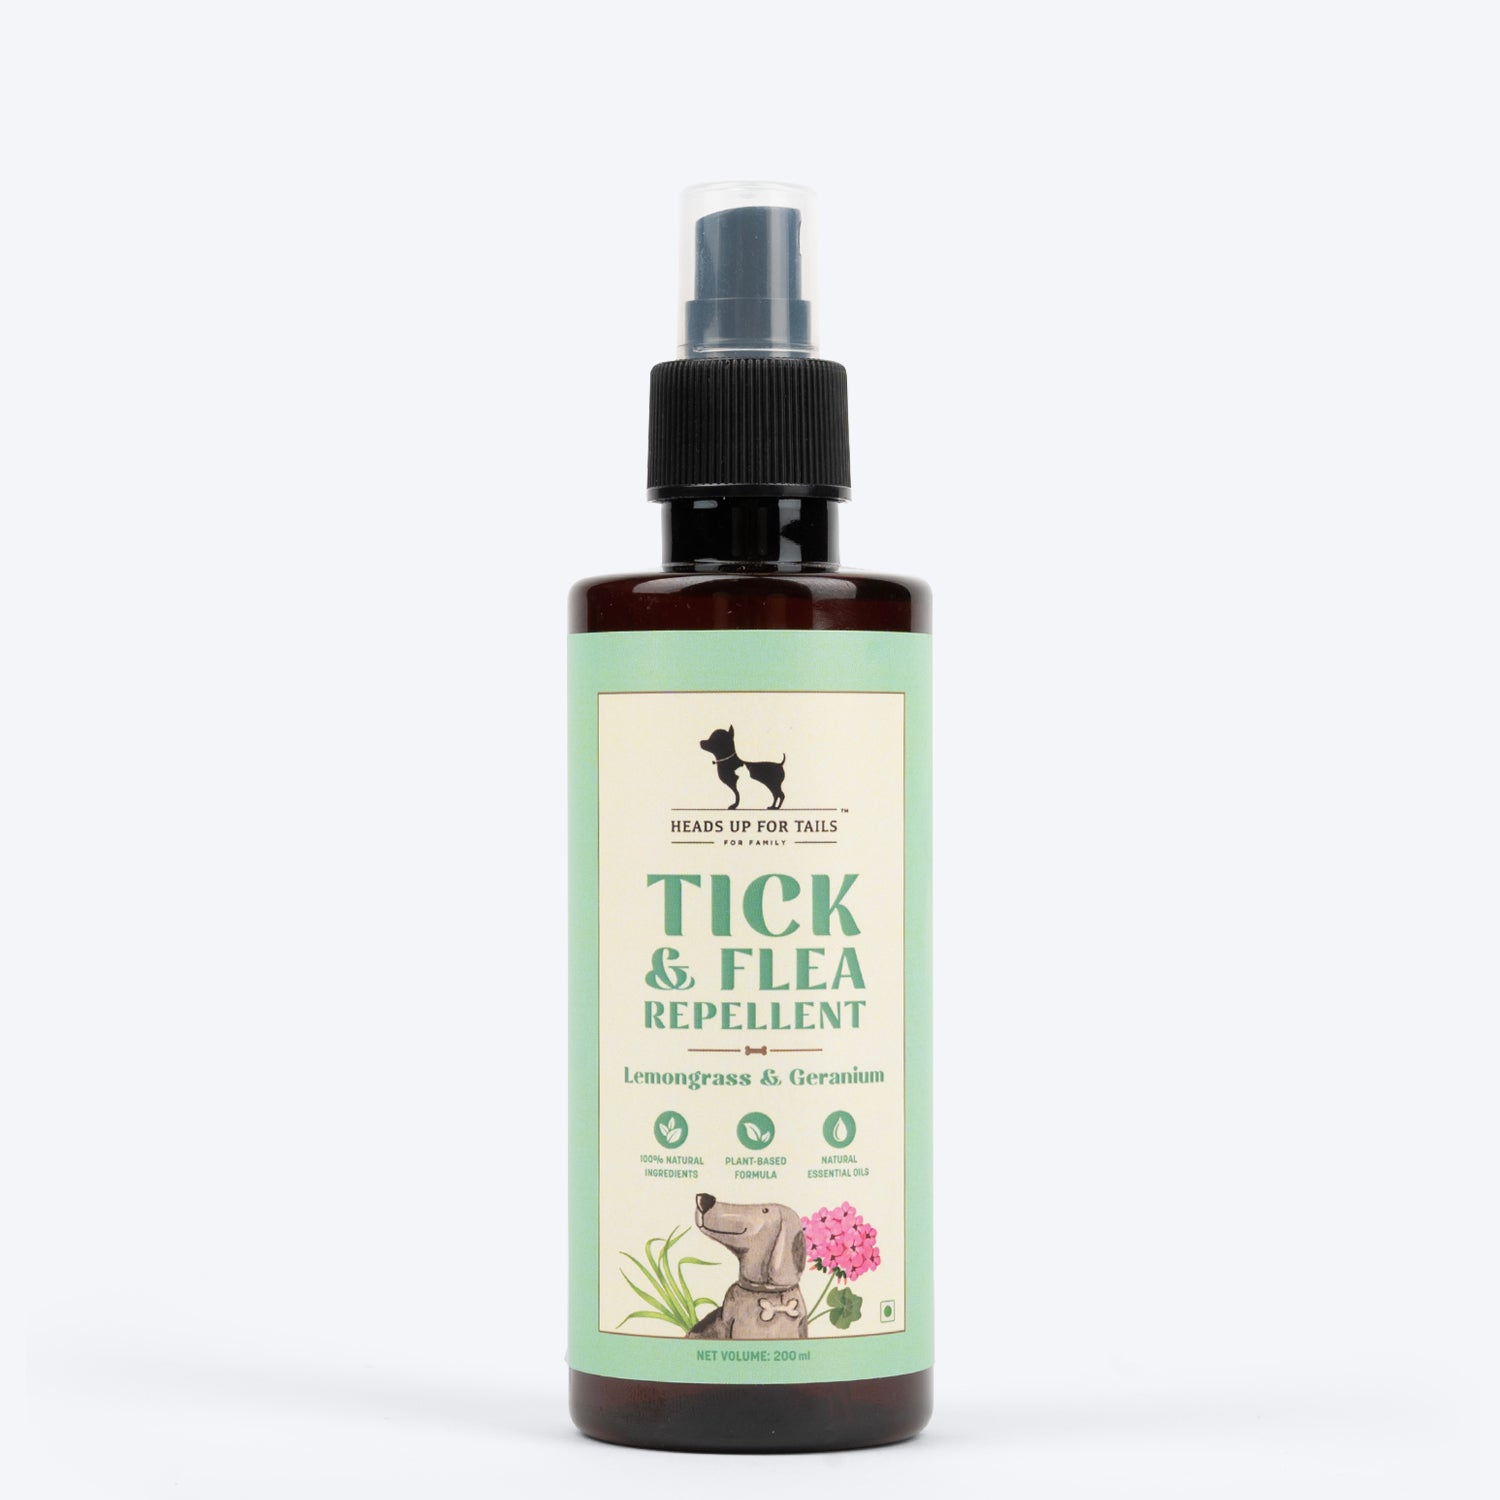 HUFT Organic Anti-Tick and Flea Spray for Dogs - 200 ml - Heads Up For Tails